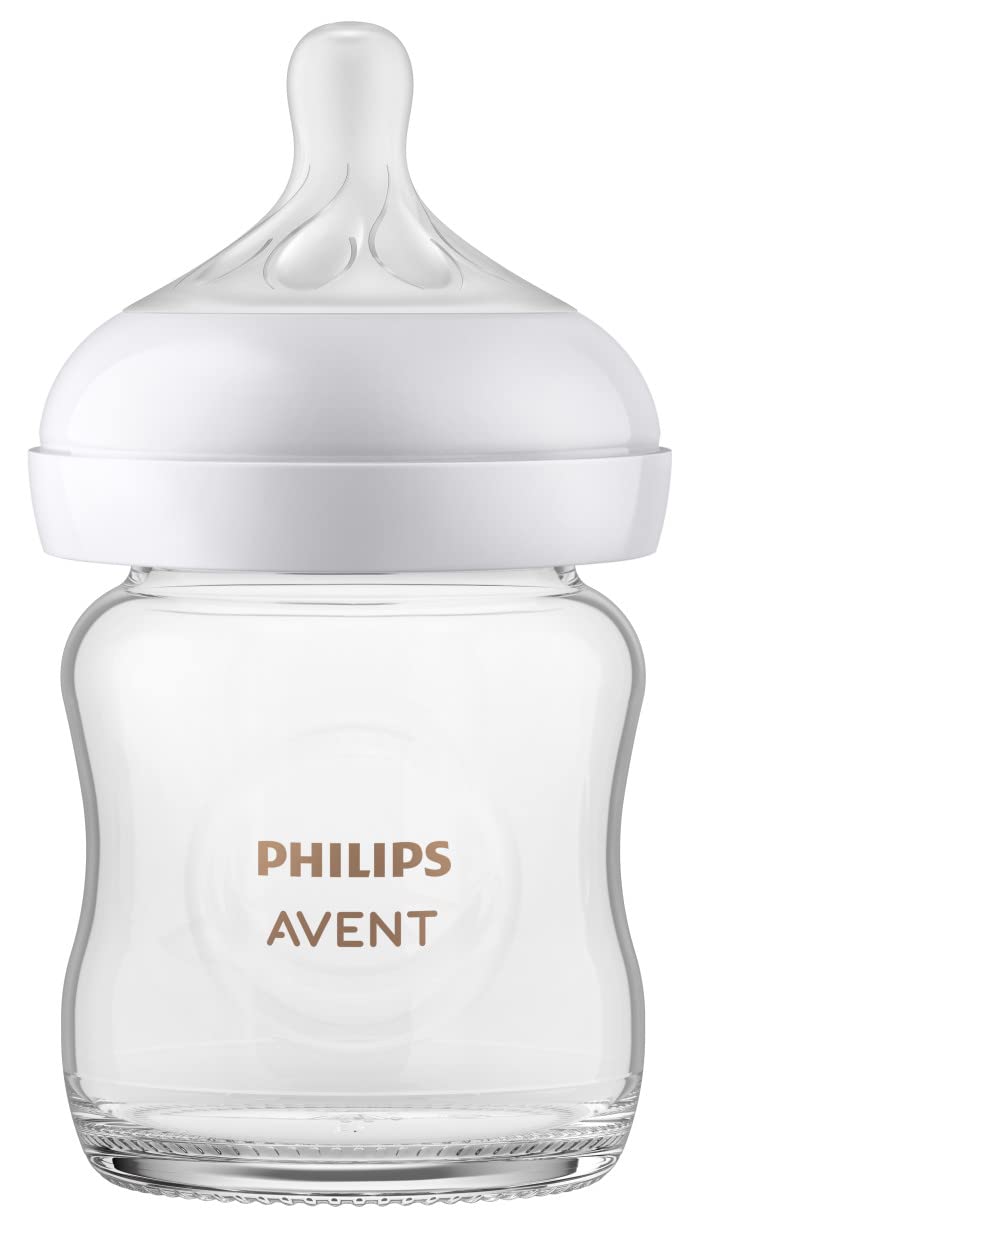 Philips AVENT Glass Natural Baby Bottle with Natural Response Nipple, best glass baby bottles